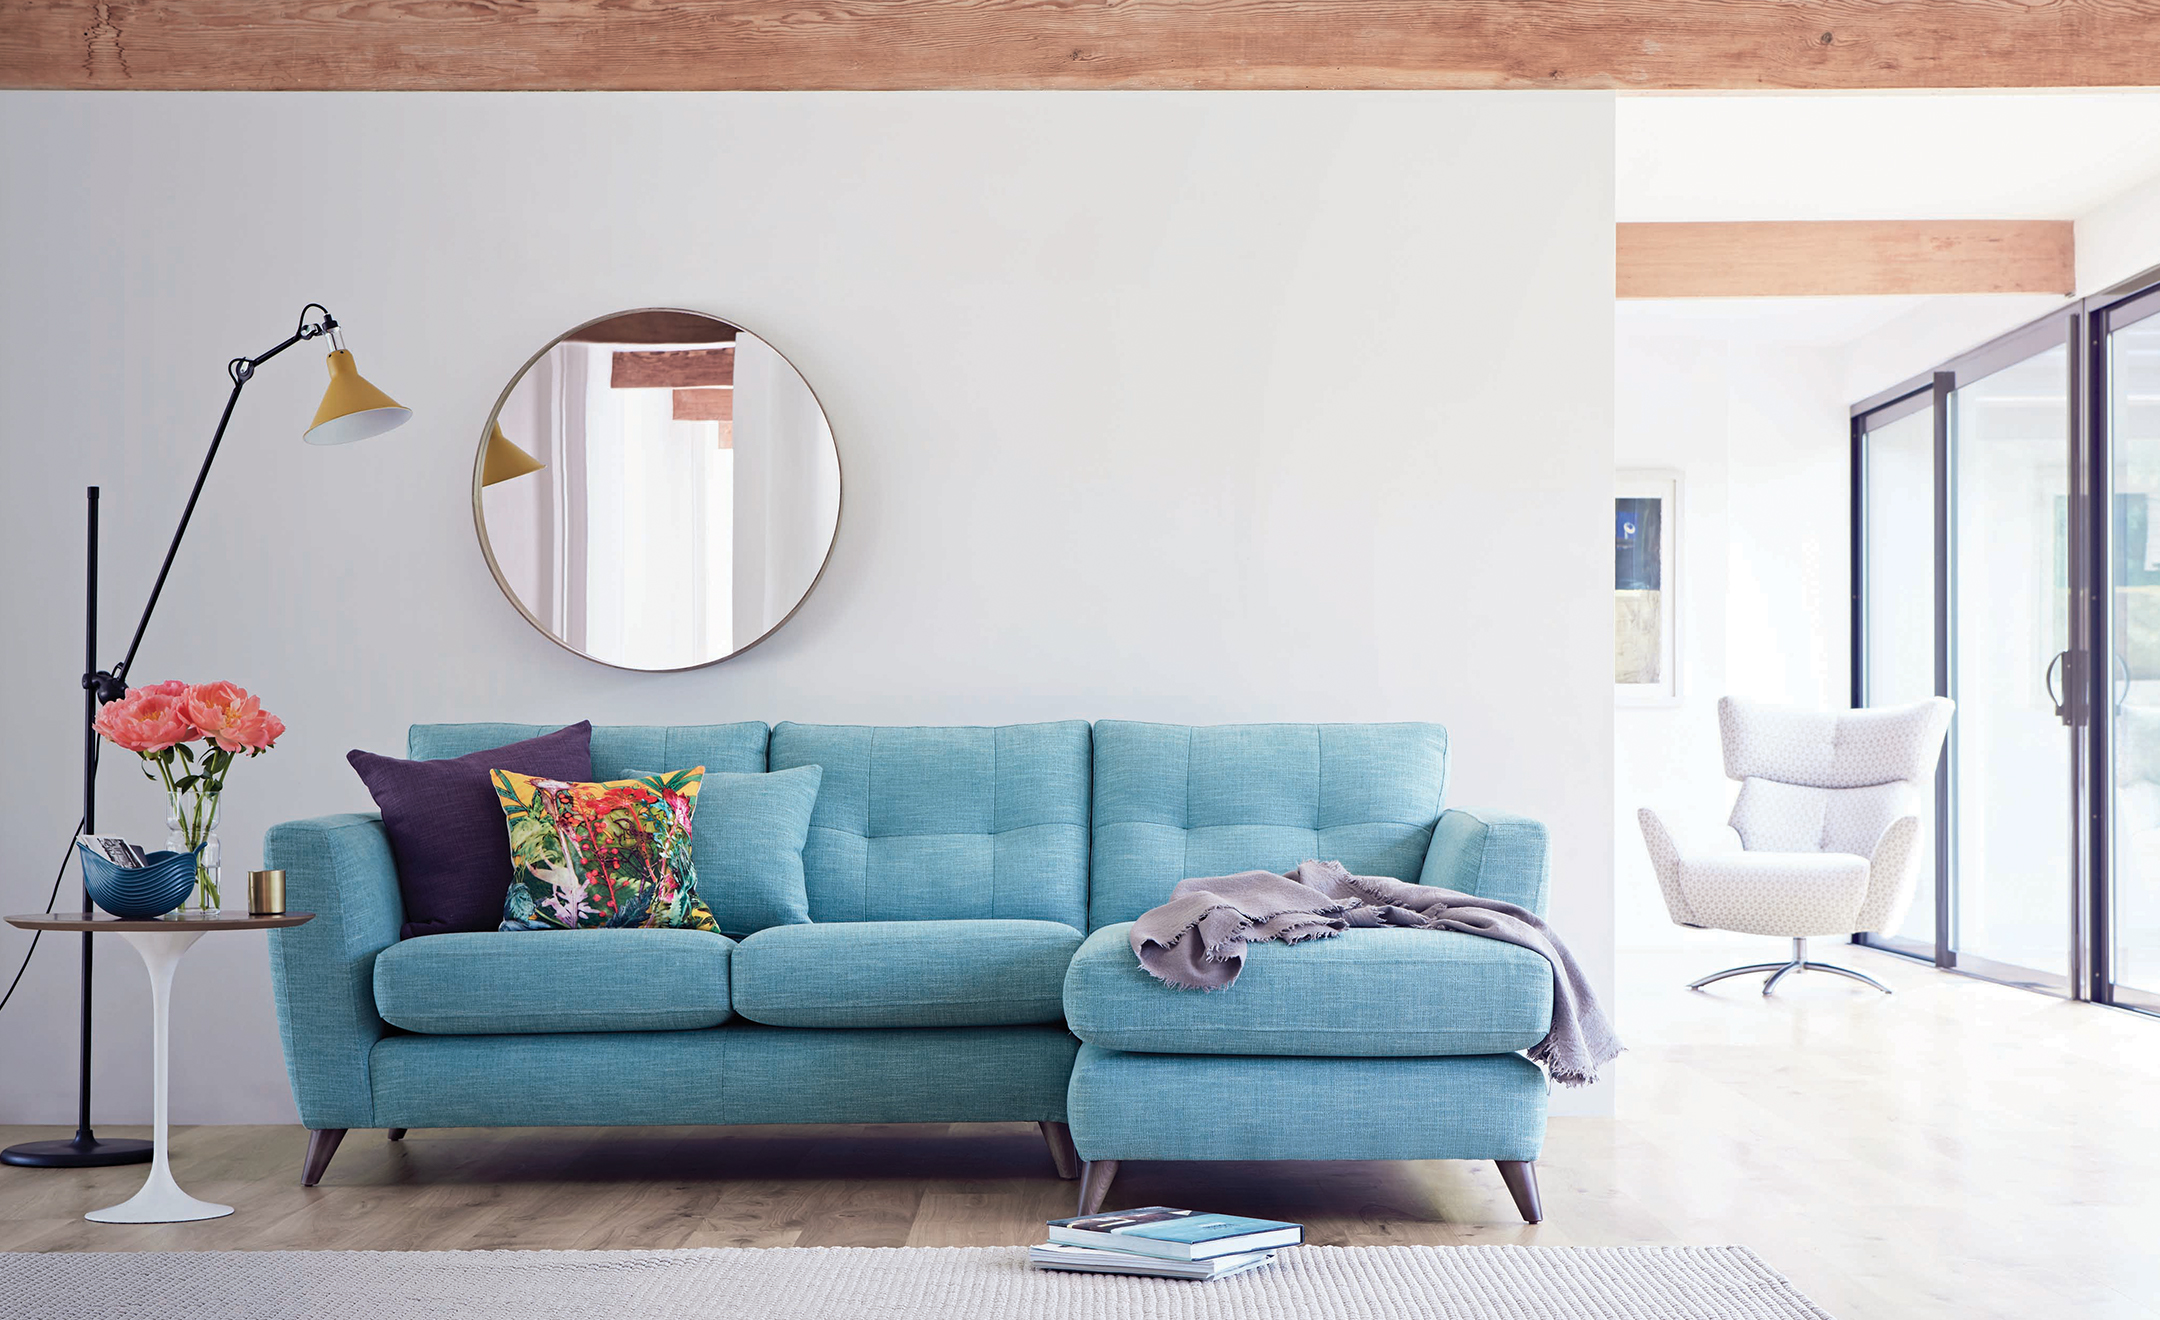 How to Choose the Perfect Sofa for Your Living Space